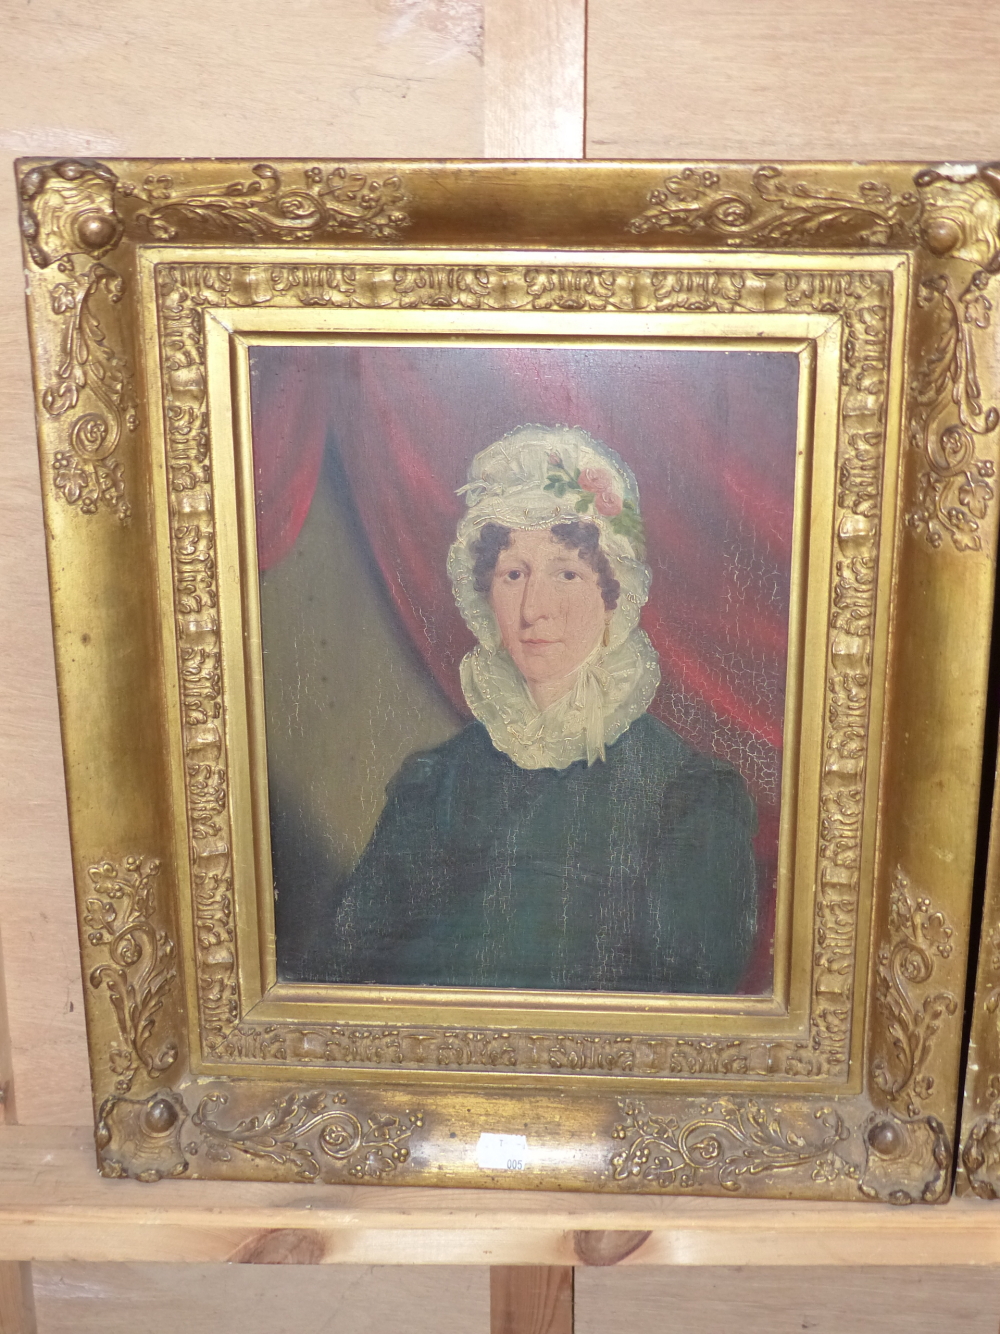 EARLY 19th CENTURY ENGLISH SCHOOL. A PAIR OF PORTRAITS, OIL ON PANEL, ORIGINAL GILT FRAMES. 35 x - Image 7 of 11